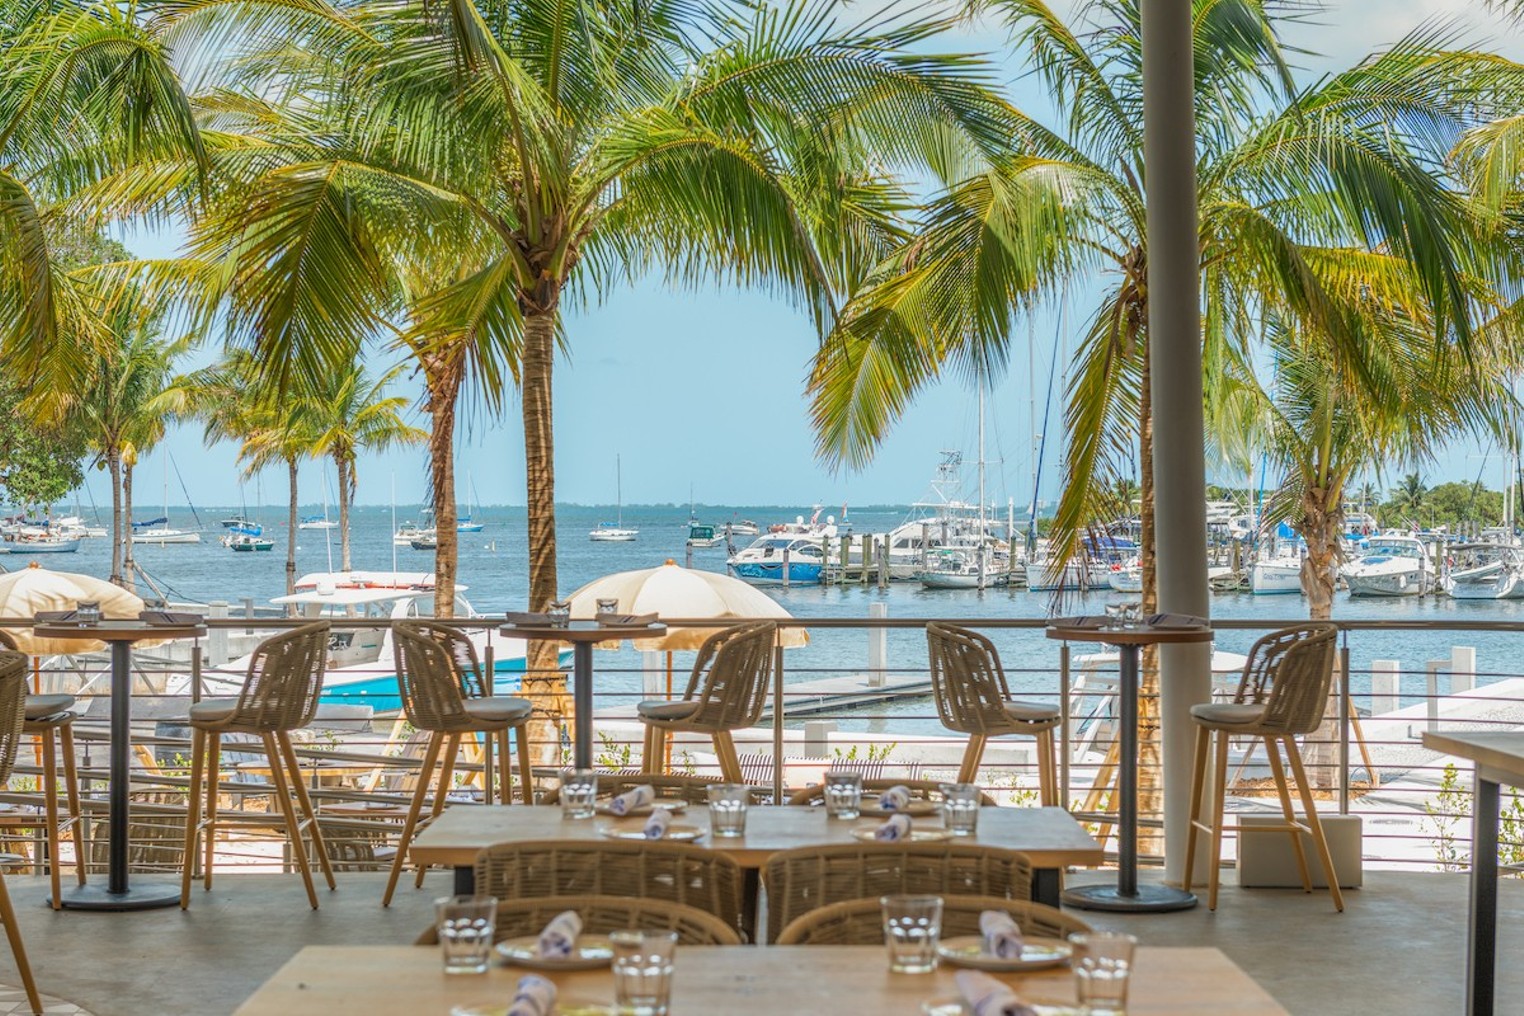 Best Waterfront Bar 2023 Bayshore Club Bar and Grill Best Restaurants, Bars, Clubs, Music and Stores in Miami Miami New Times photo